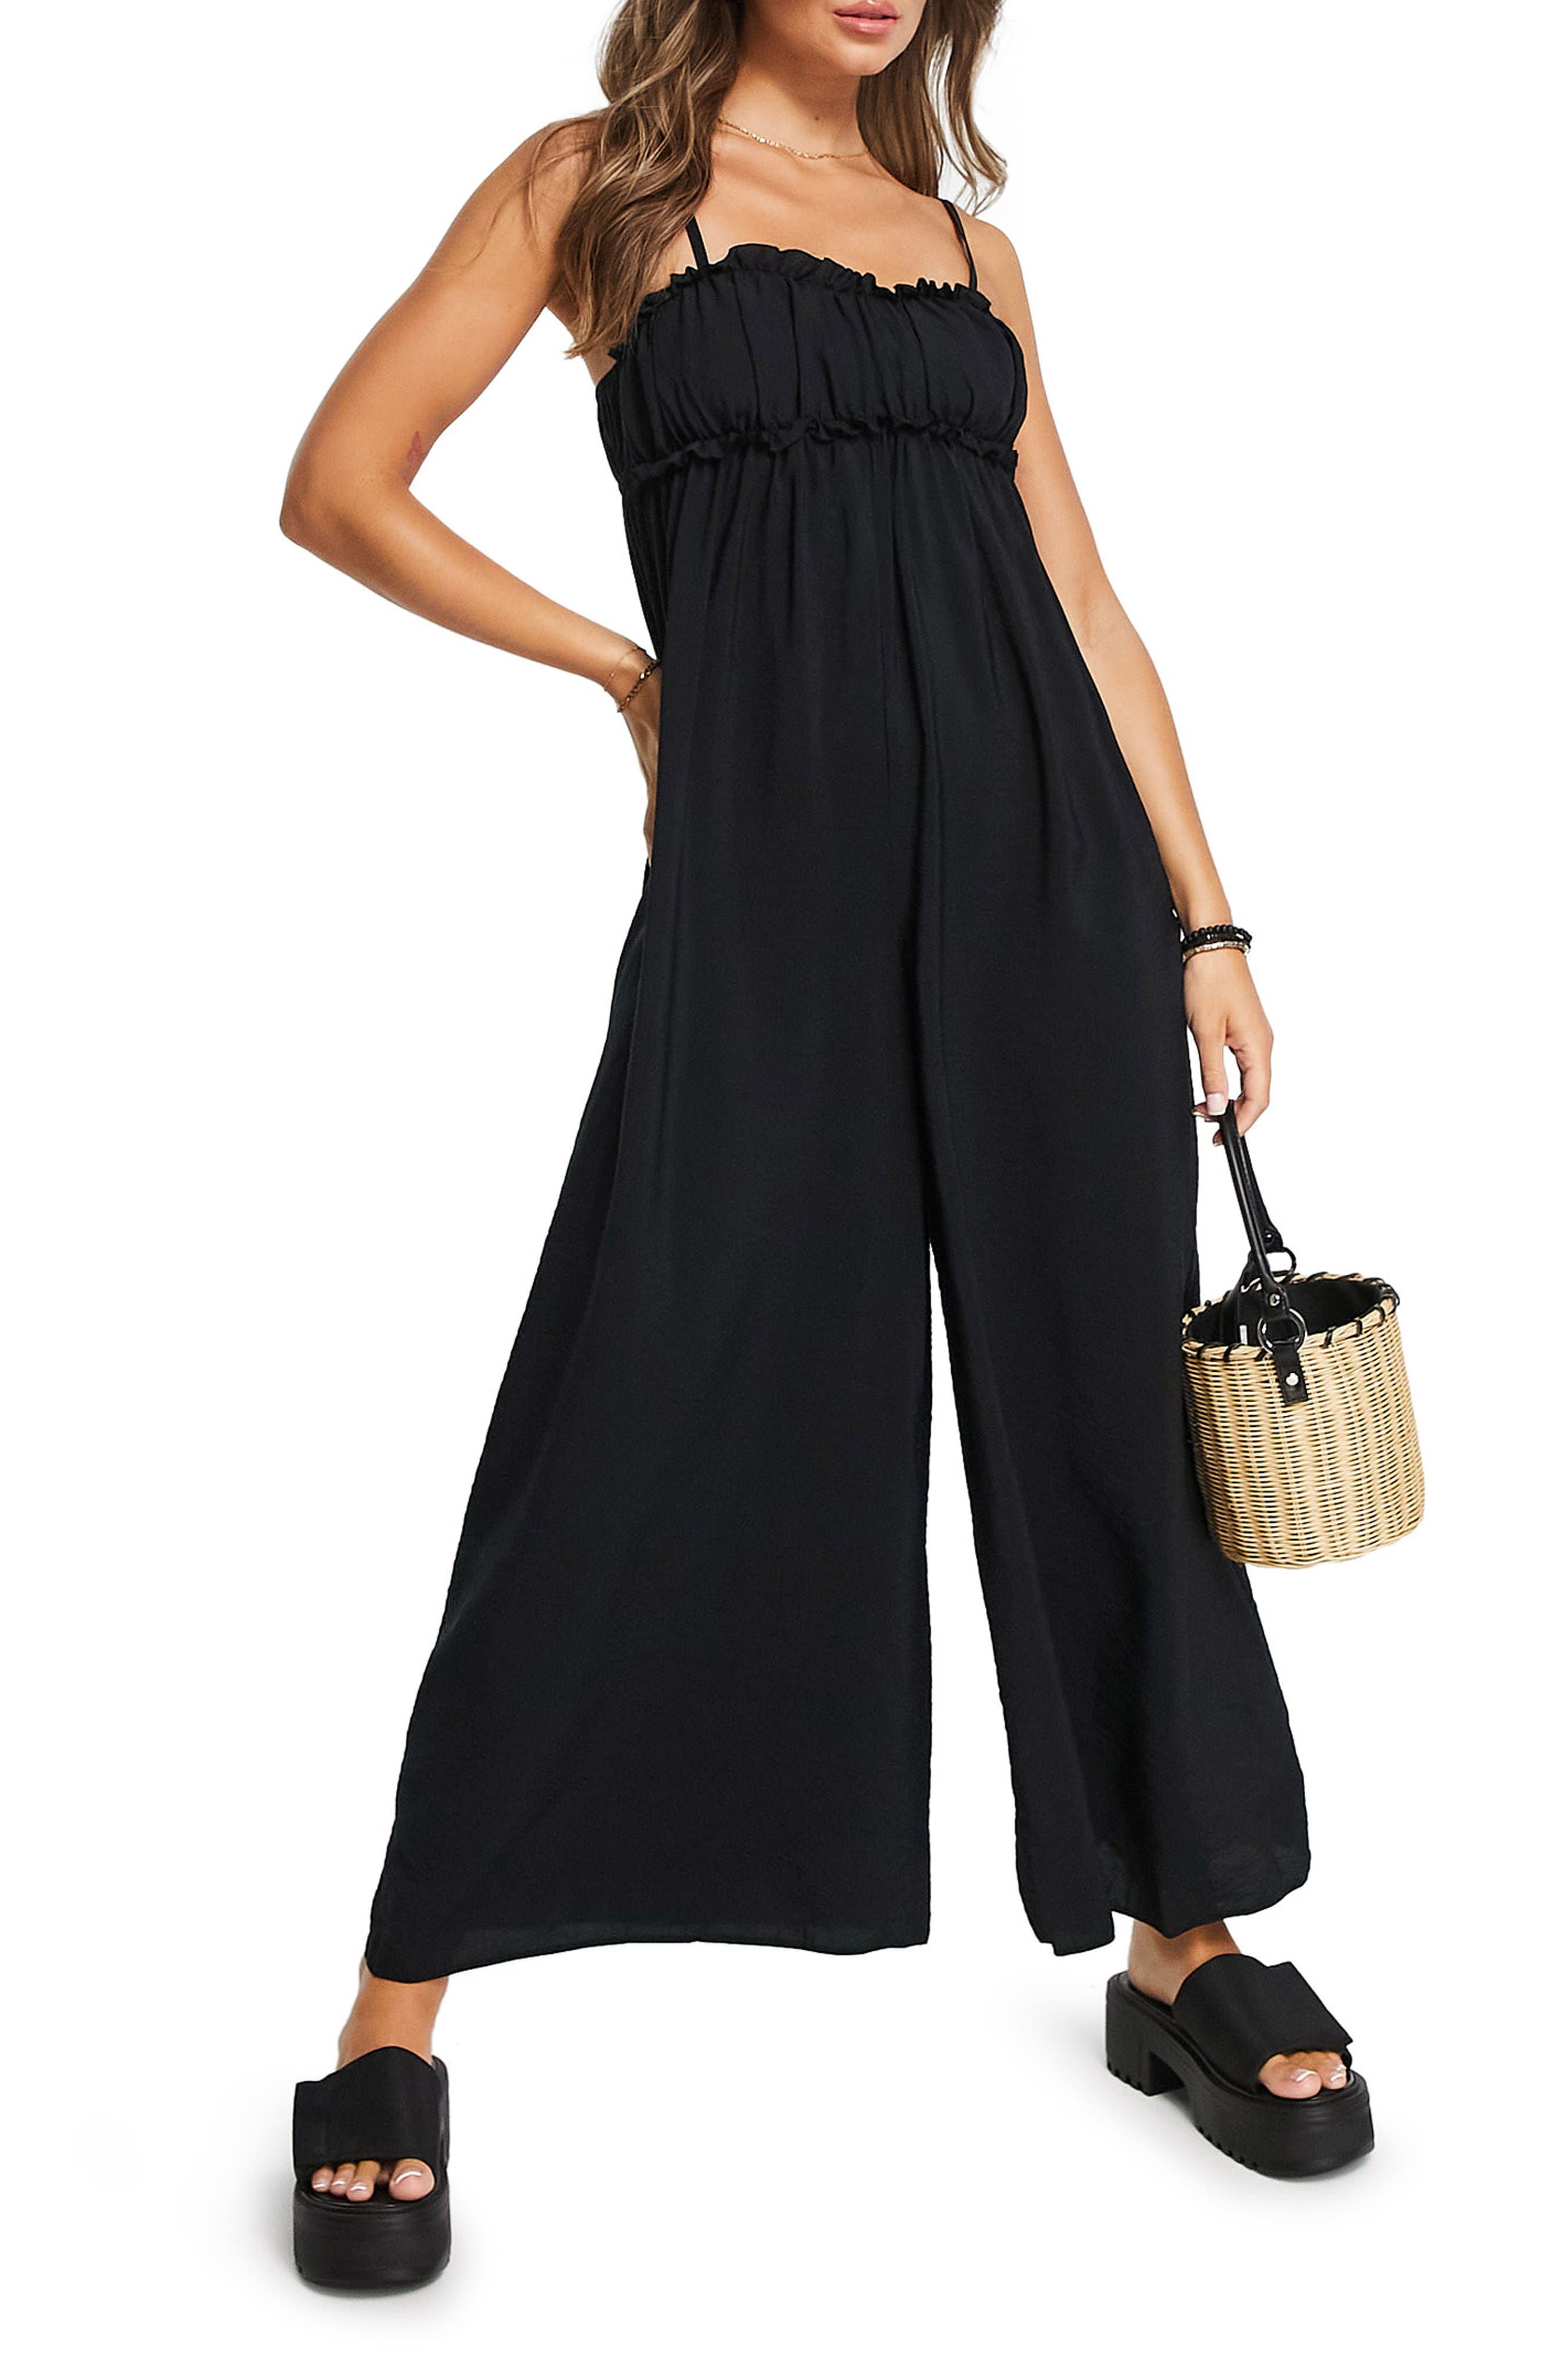 Womens Clothing Jumpsuits and rompers Playsuits Bebe Synthetic Plunge Neck Overlay Romper in Black 